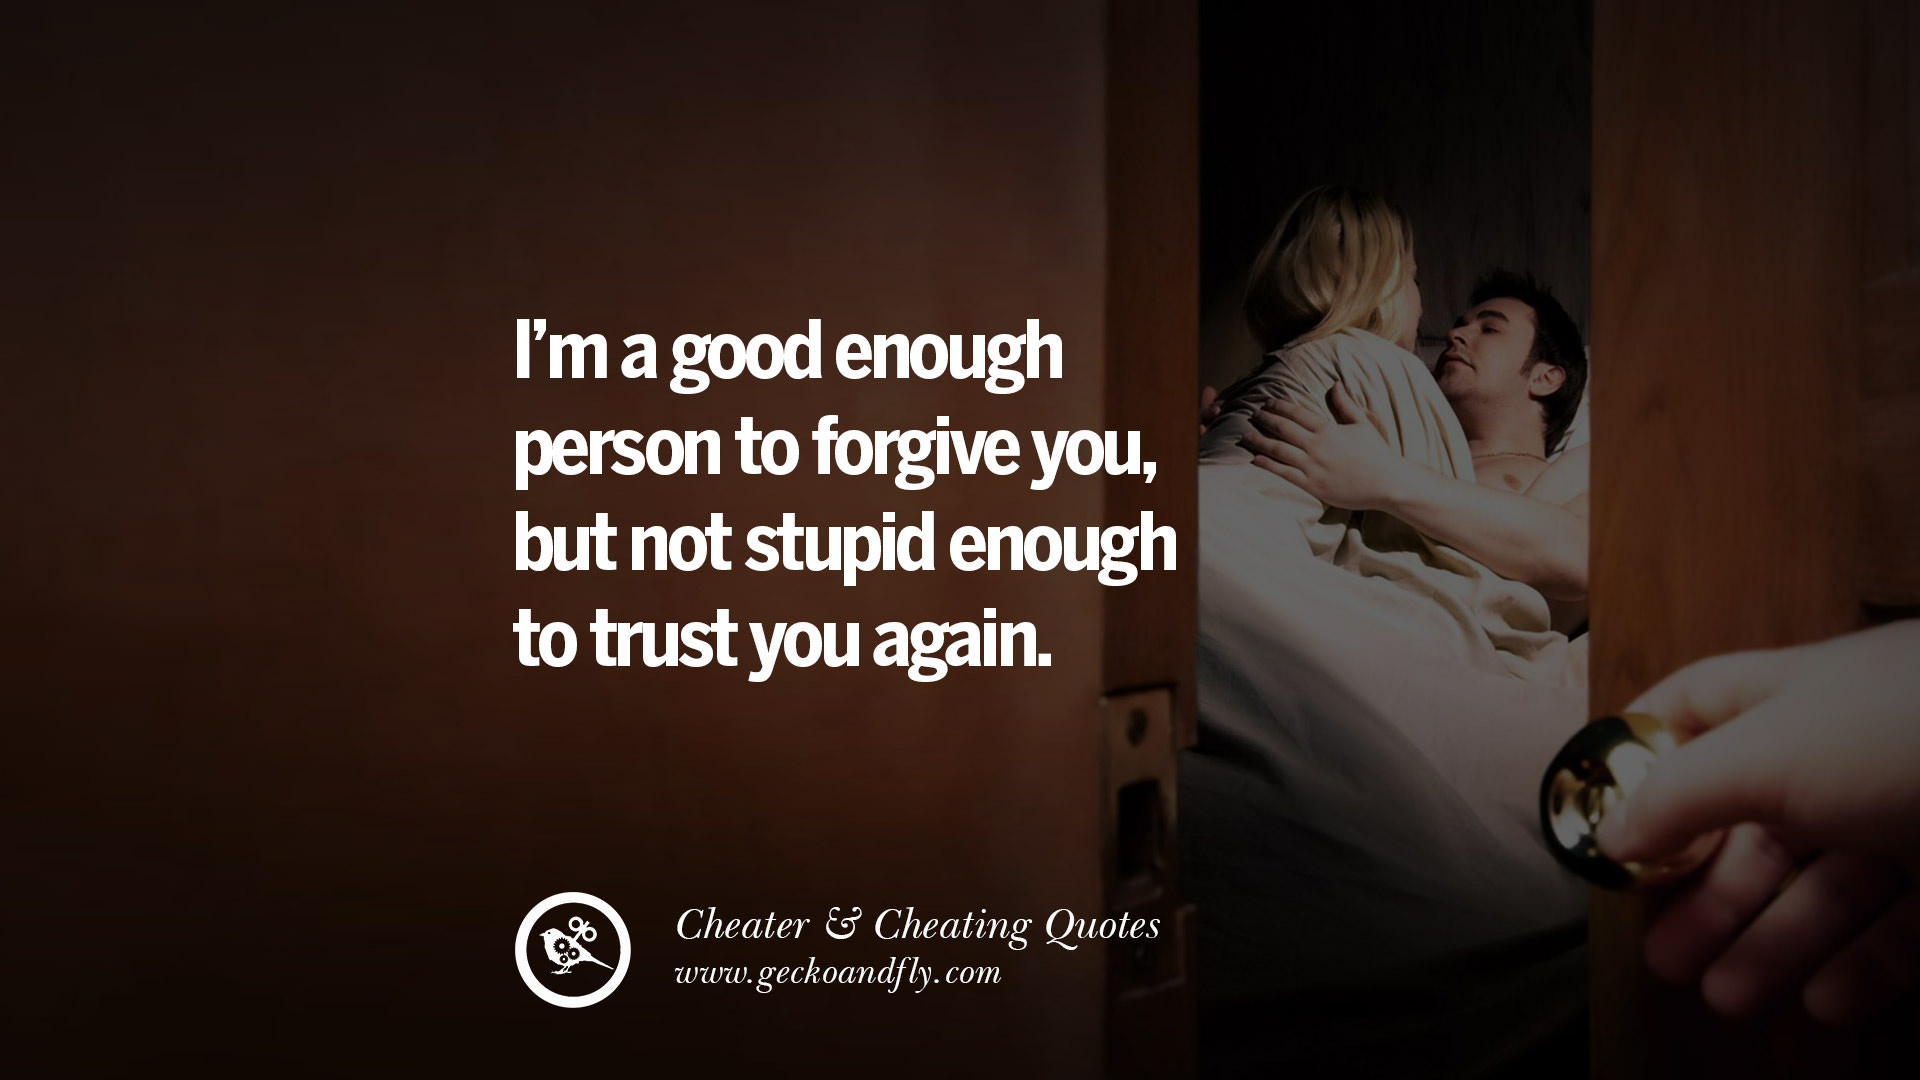 I m a good enough person to forgive you but not stupid enough to